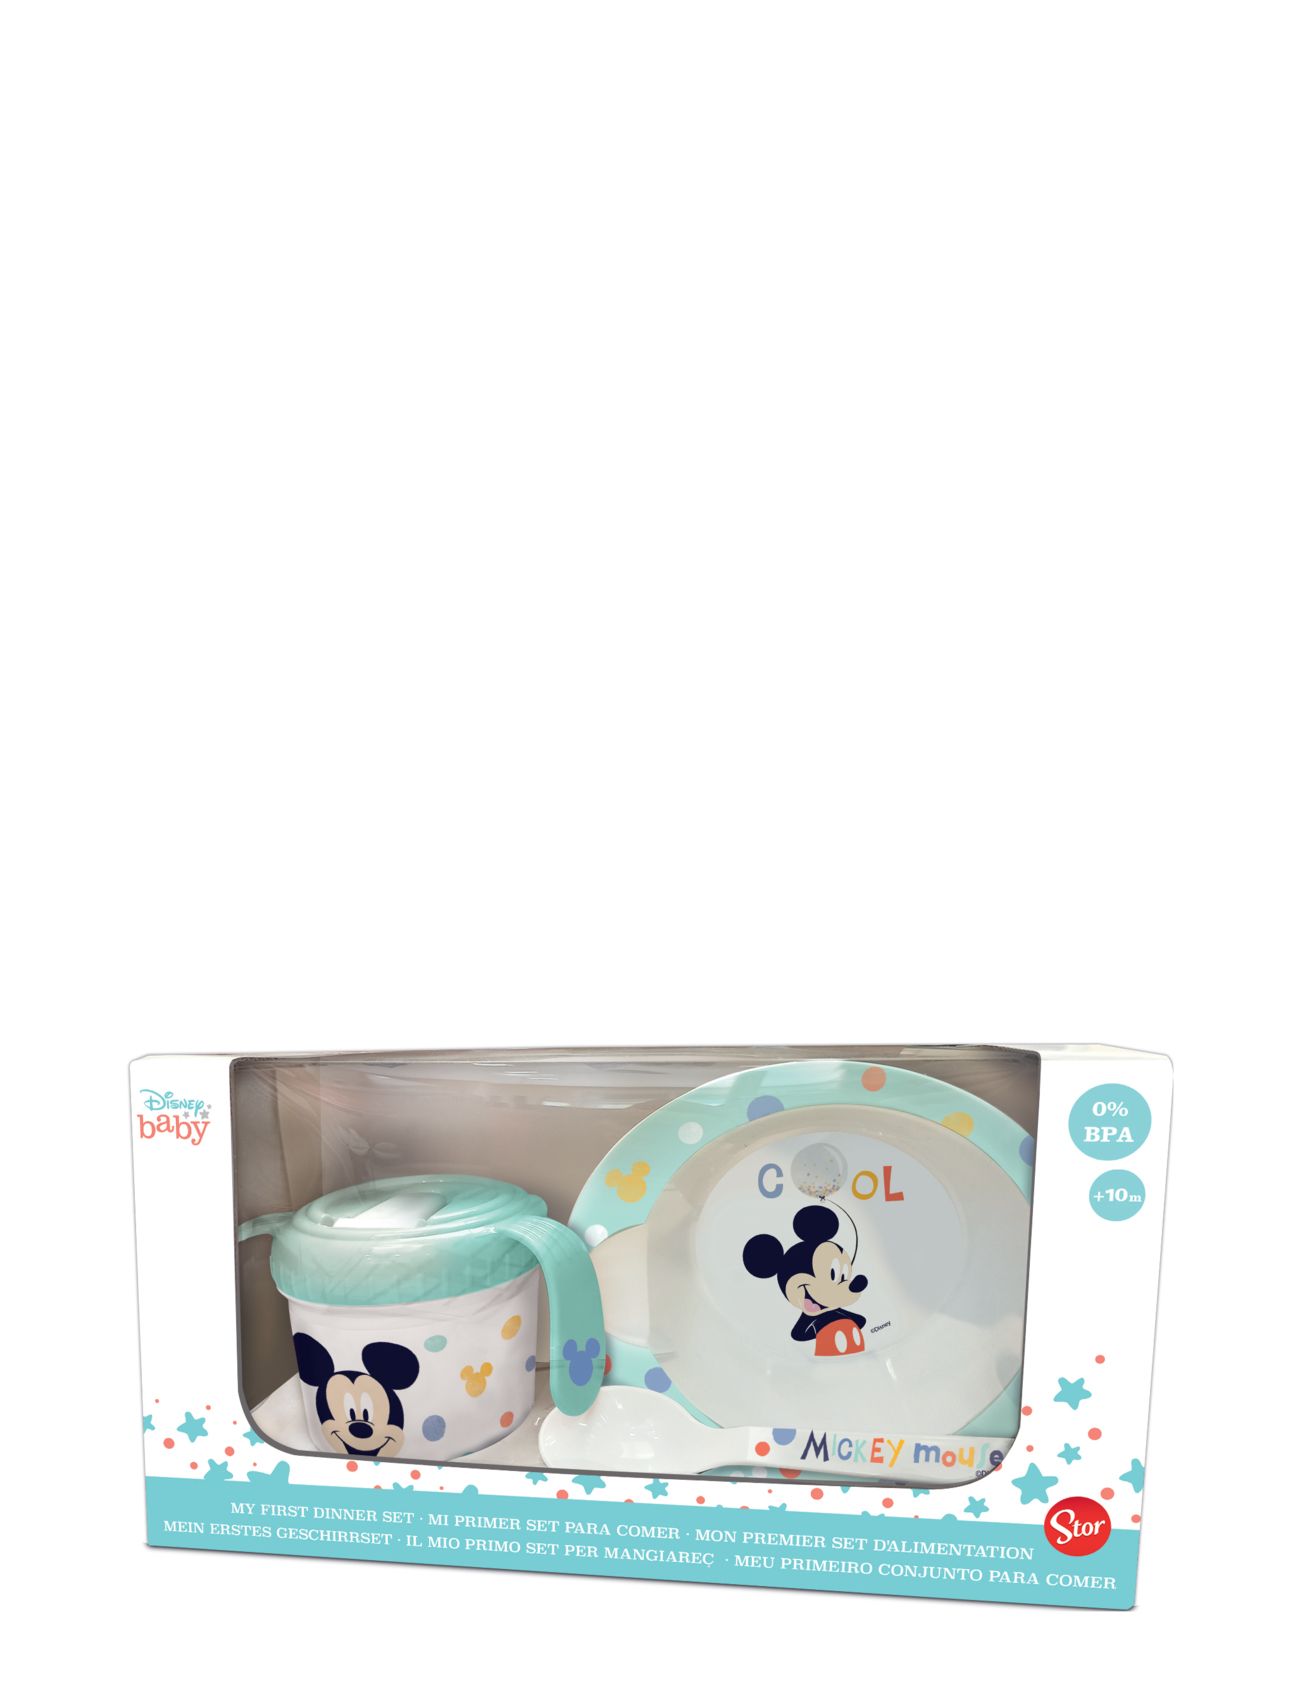 Disney Baby 3 Pcs Set In Gift Box Mickey Cool Like Mickey Home Meal Time Dinner Sets Multi/patterned Mickey Mouse